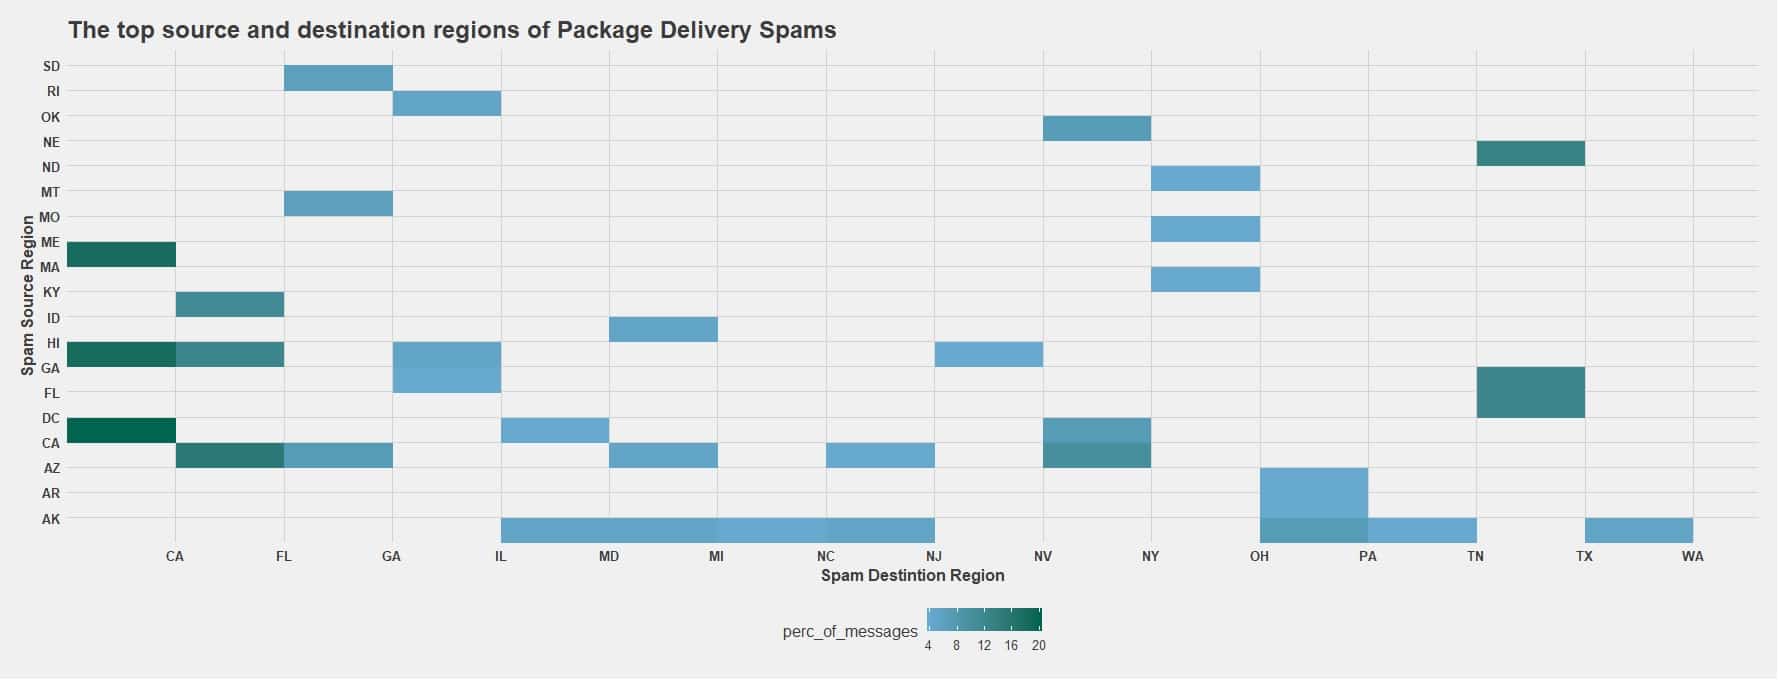 Diagram mapping the top sources and destination regions of package delivery SMS spam